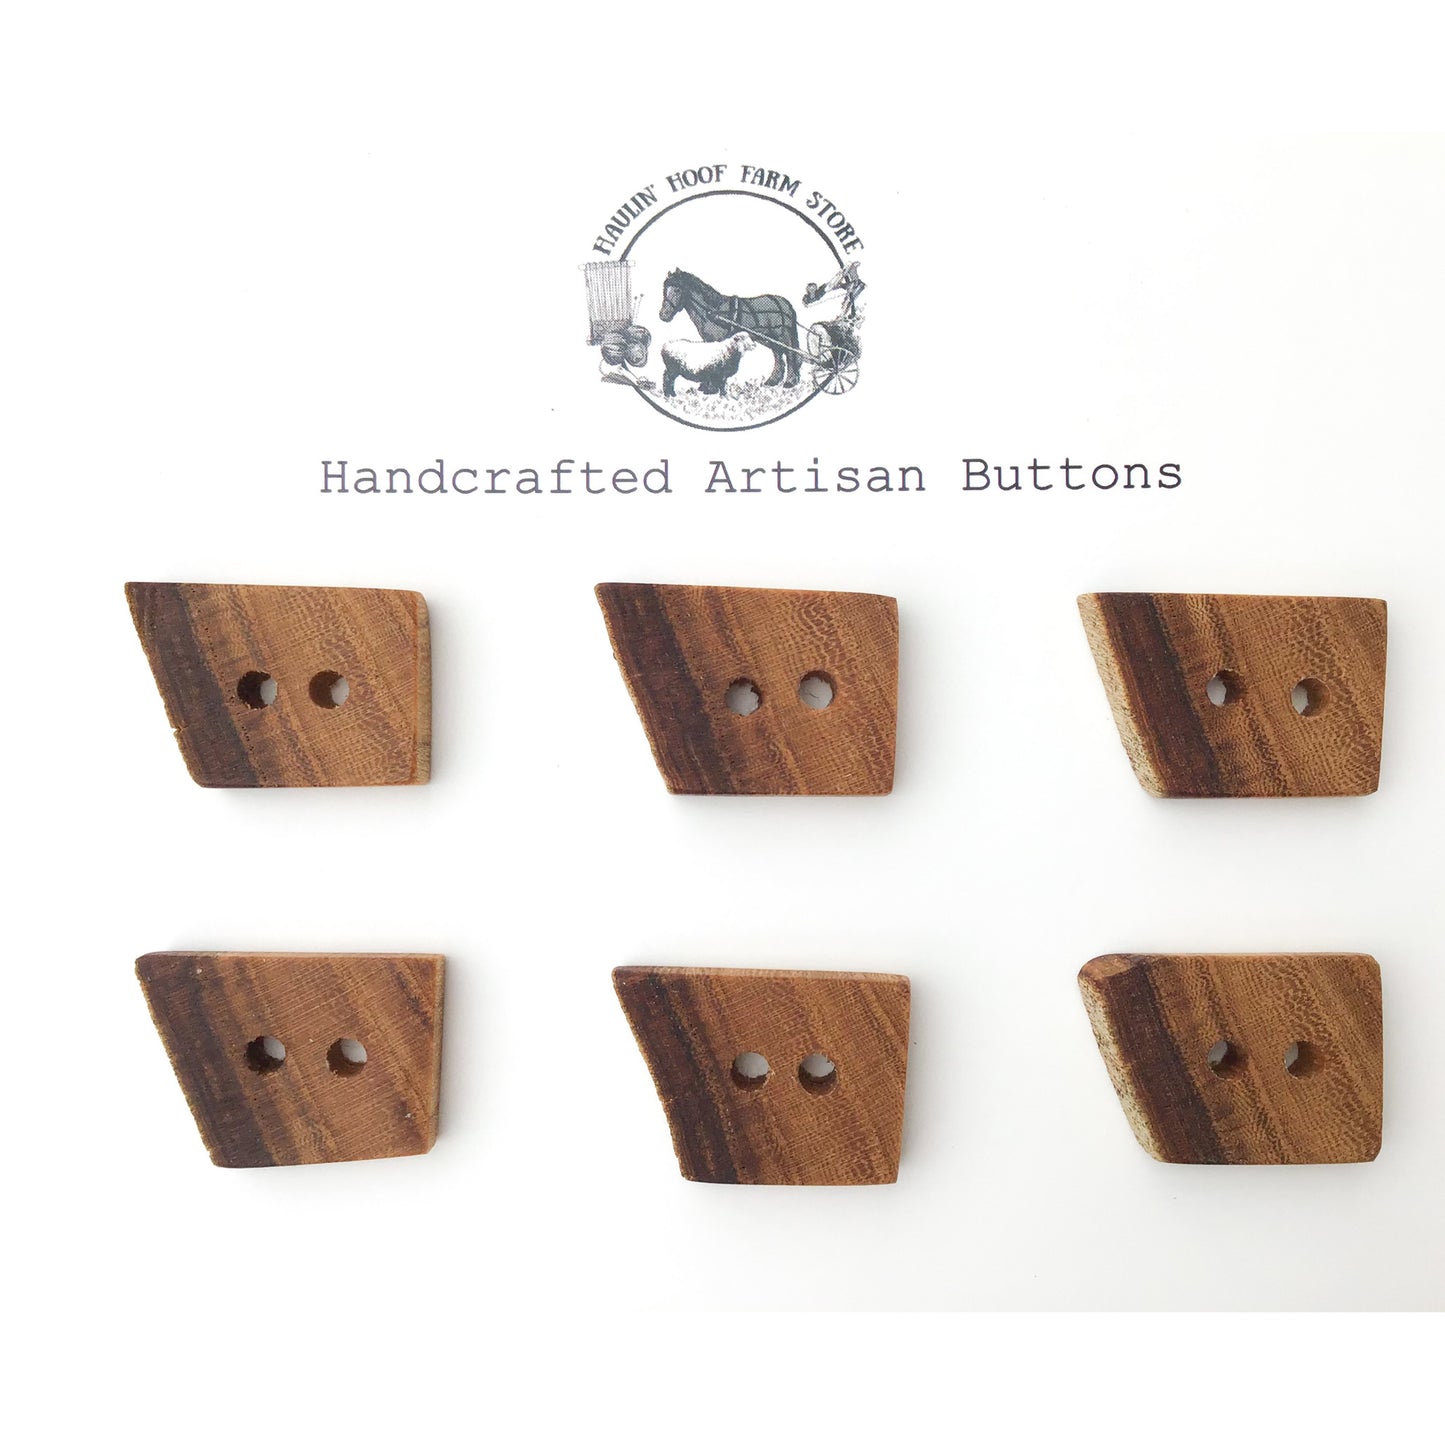 Rustic American Elm Wood Buttons - Live Edge American Elm Buttons -  5/8" x 7/8" - 6 Pack